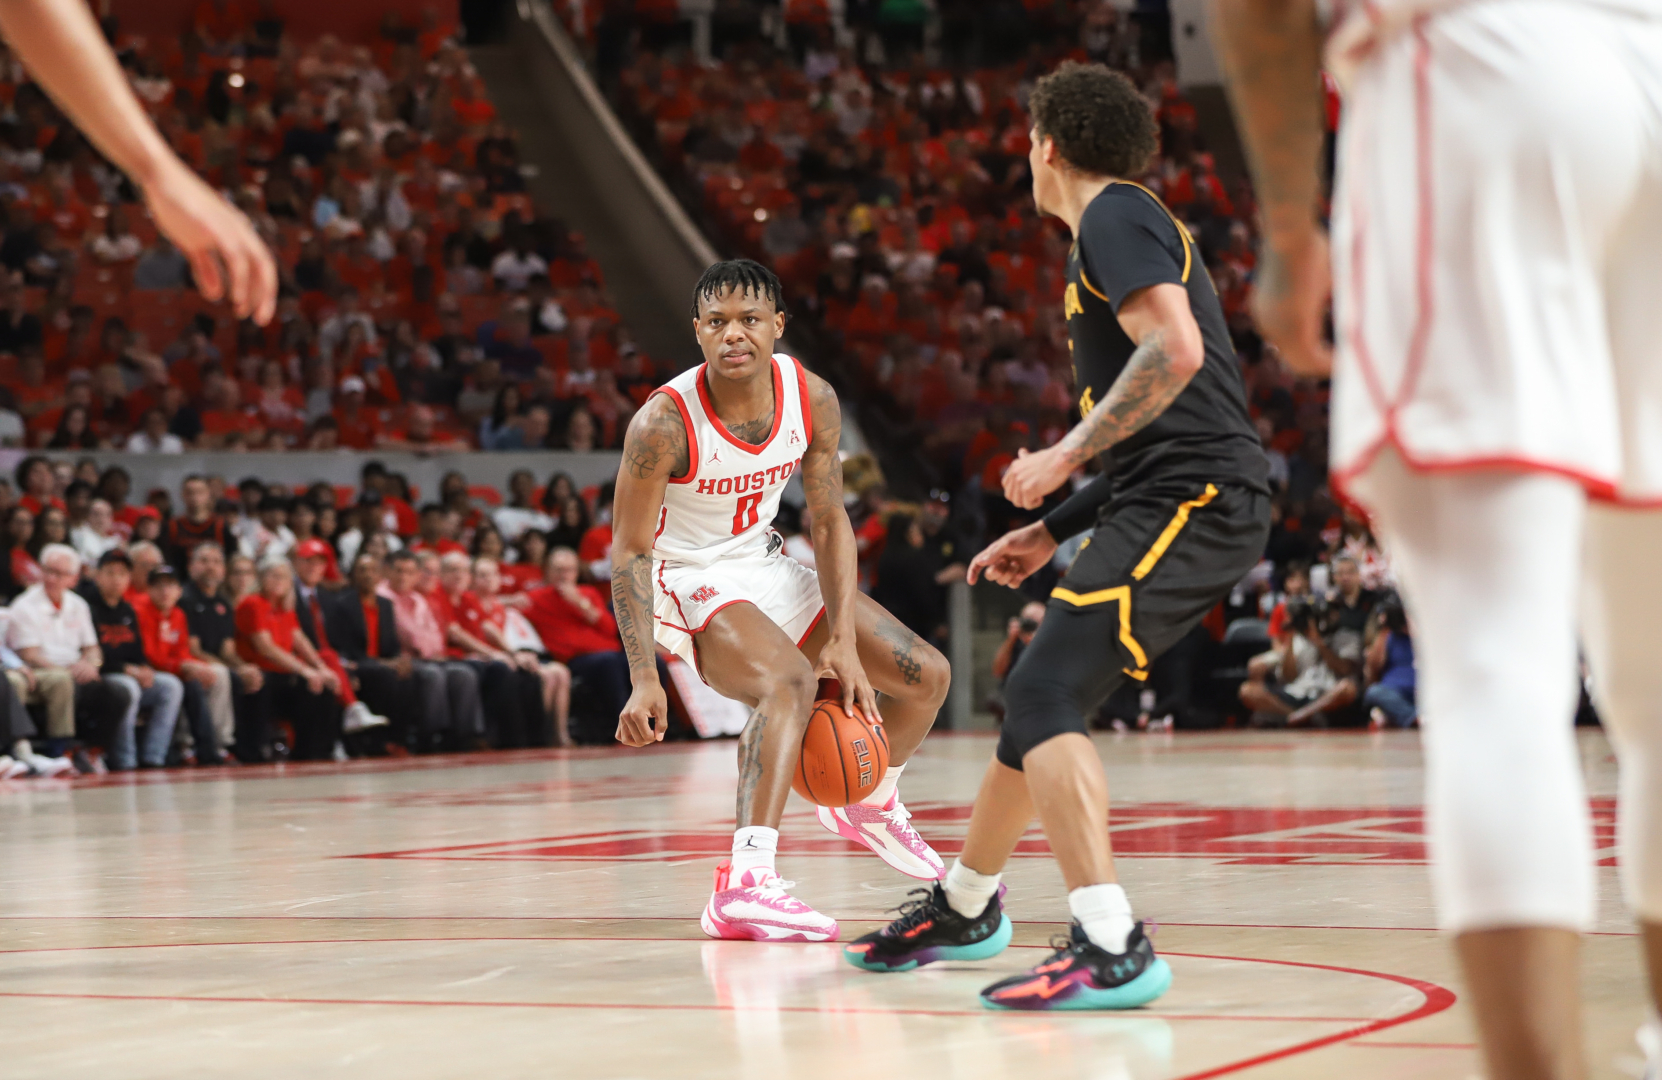 In his final game at Fertitta Center, UH senior guard Marcus Sasser scored 24 points in the Cougars' win over Wichita State on Thursday night. | Anh Le/The Cougar